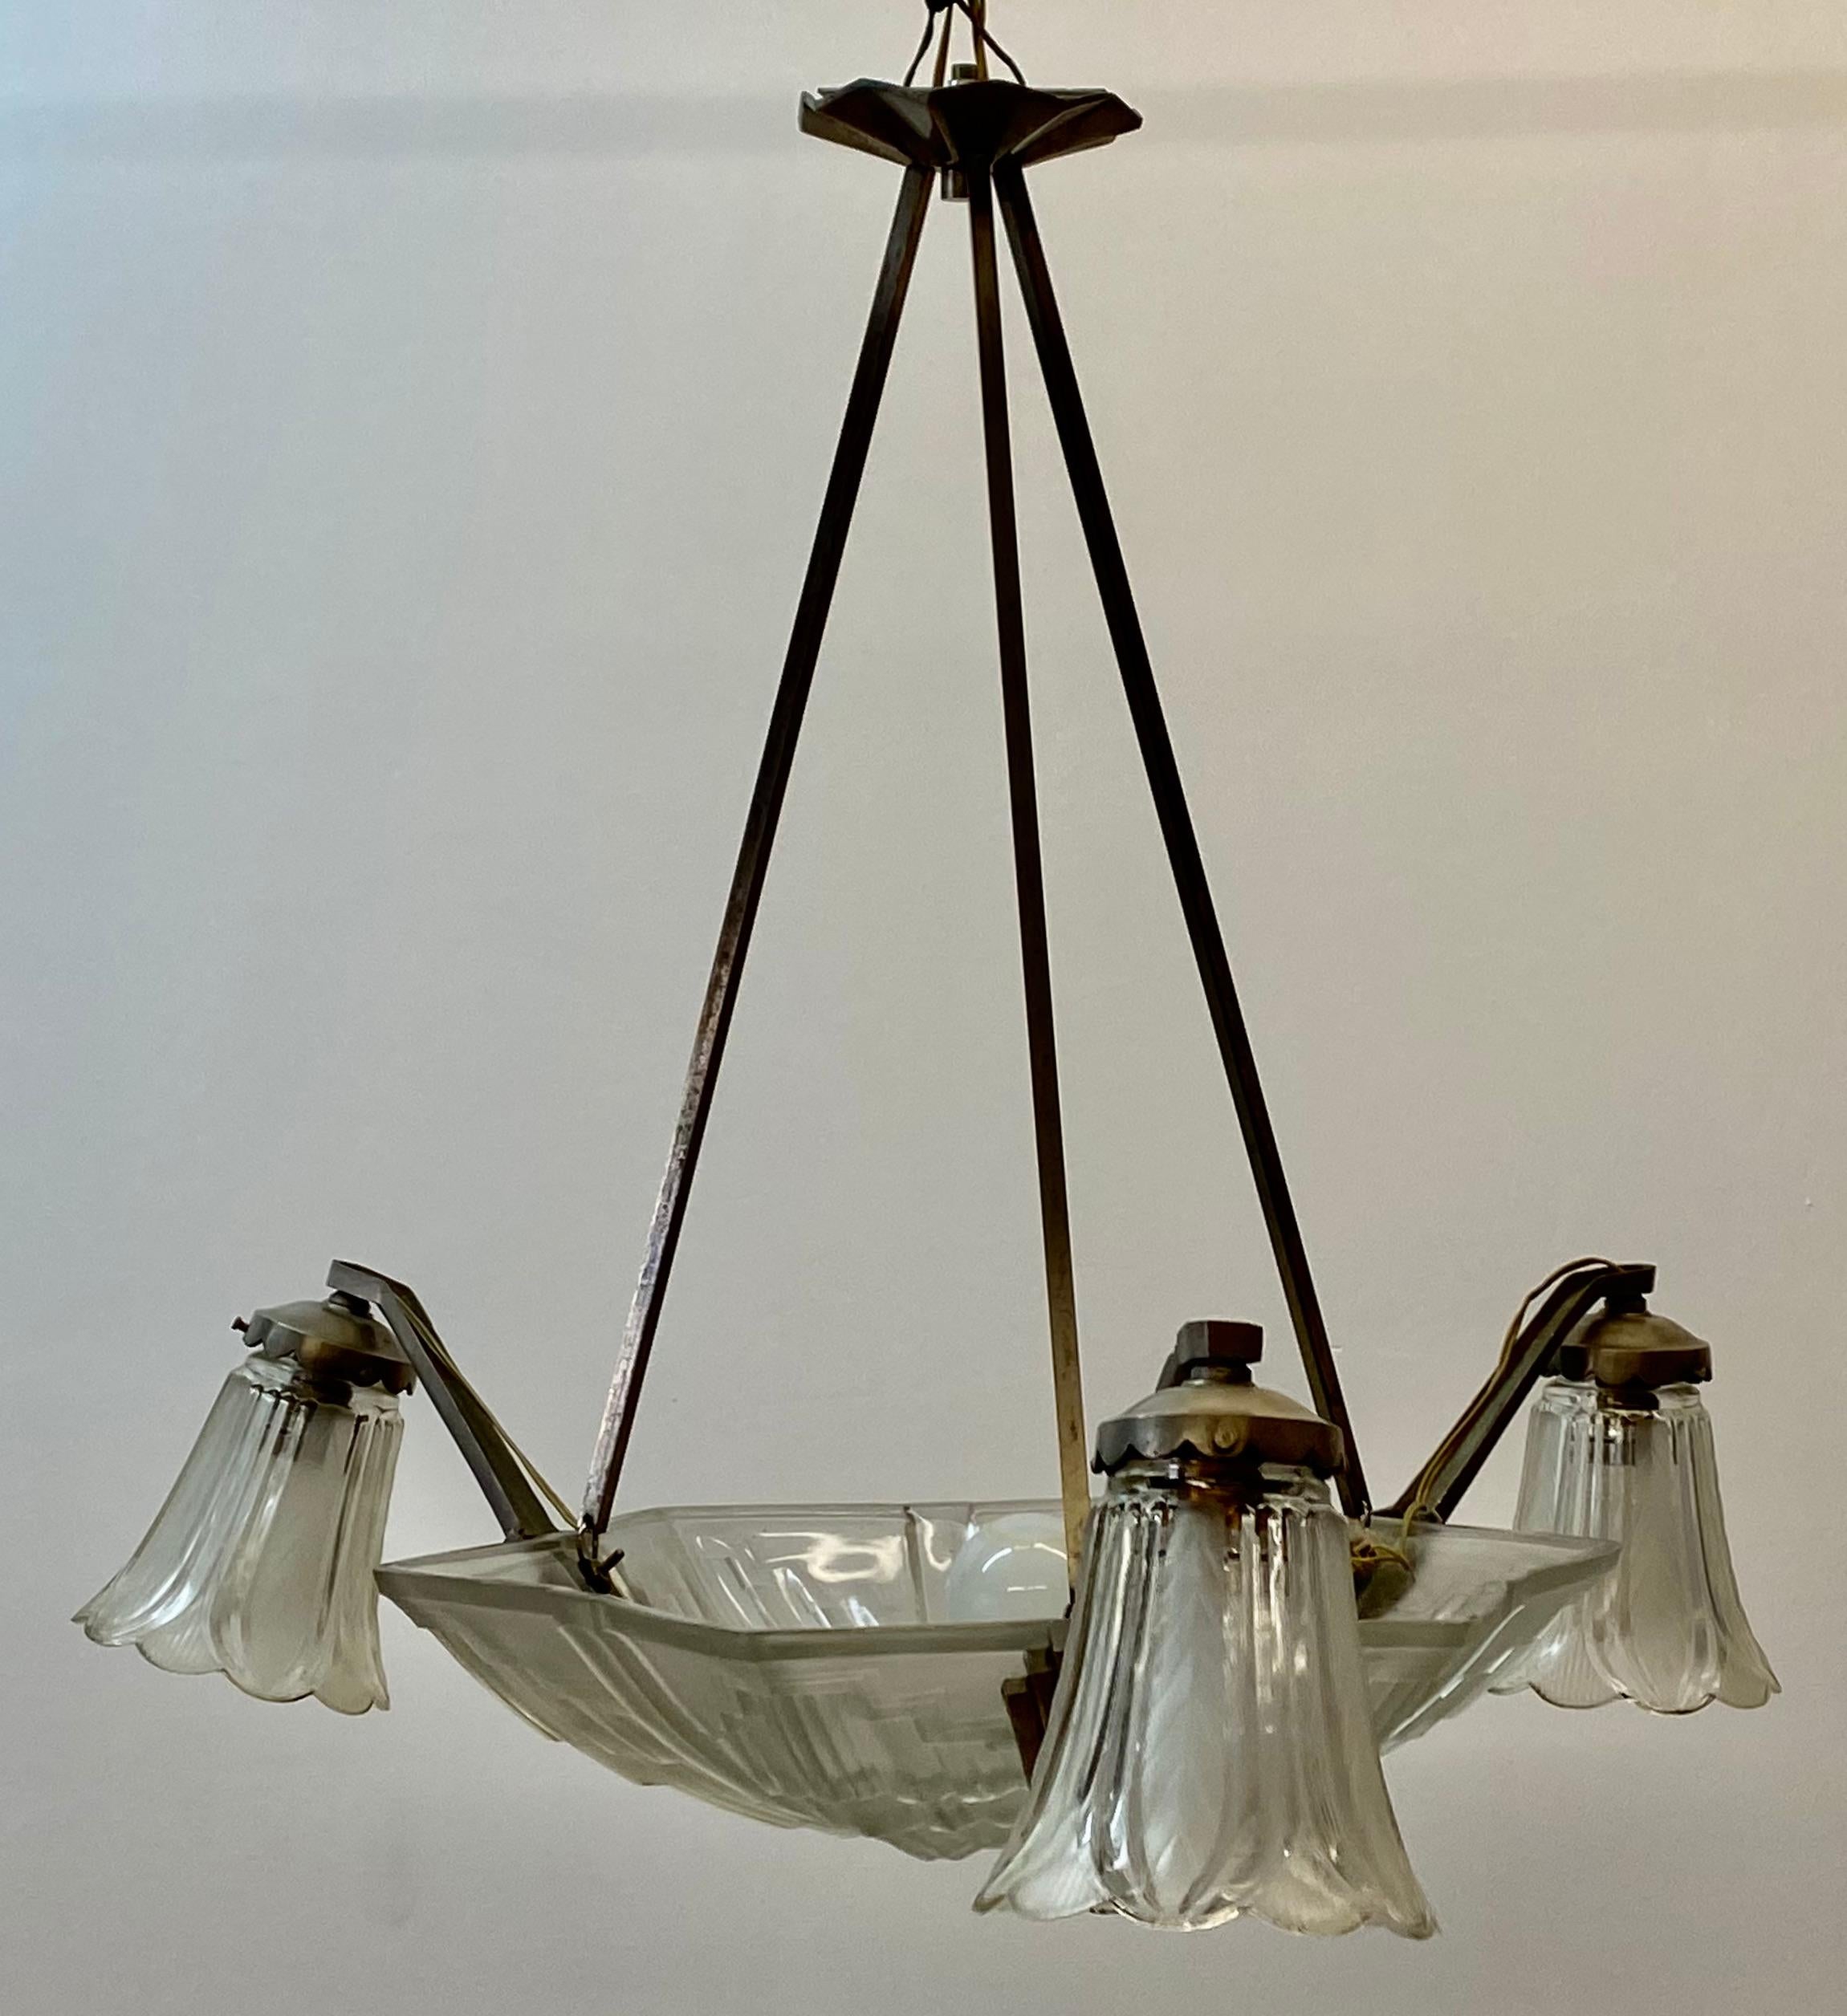 Art Deco pressed glass four light chandelier C.1940

Pressed glass chandelier with three glass flower shades under a pressed glass canopy with a geometric pattern - Classic vintage Art Deco!

The chandelier measures 23